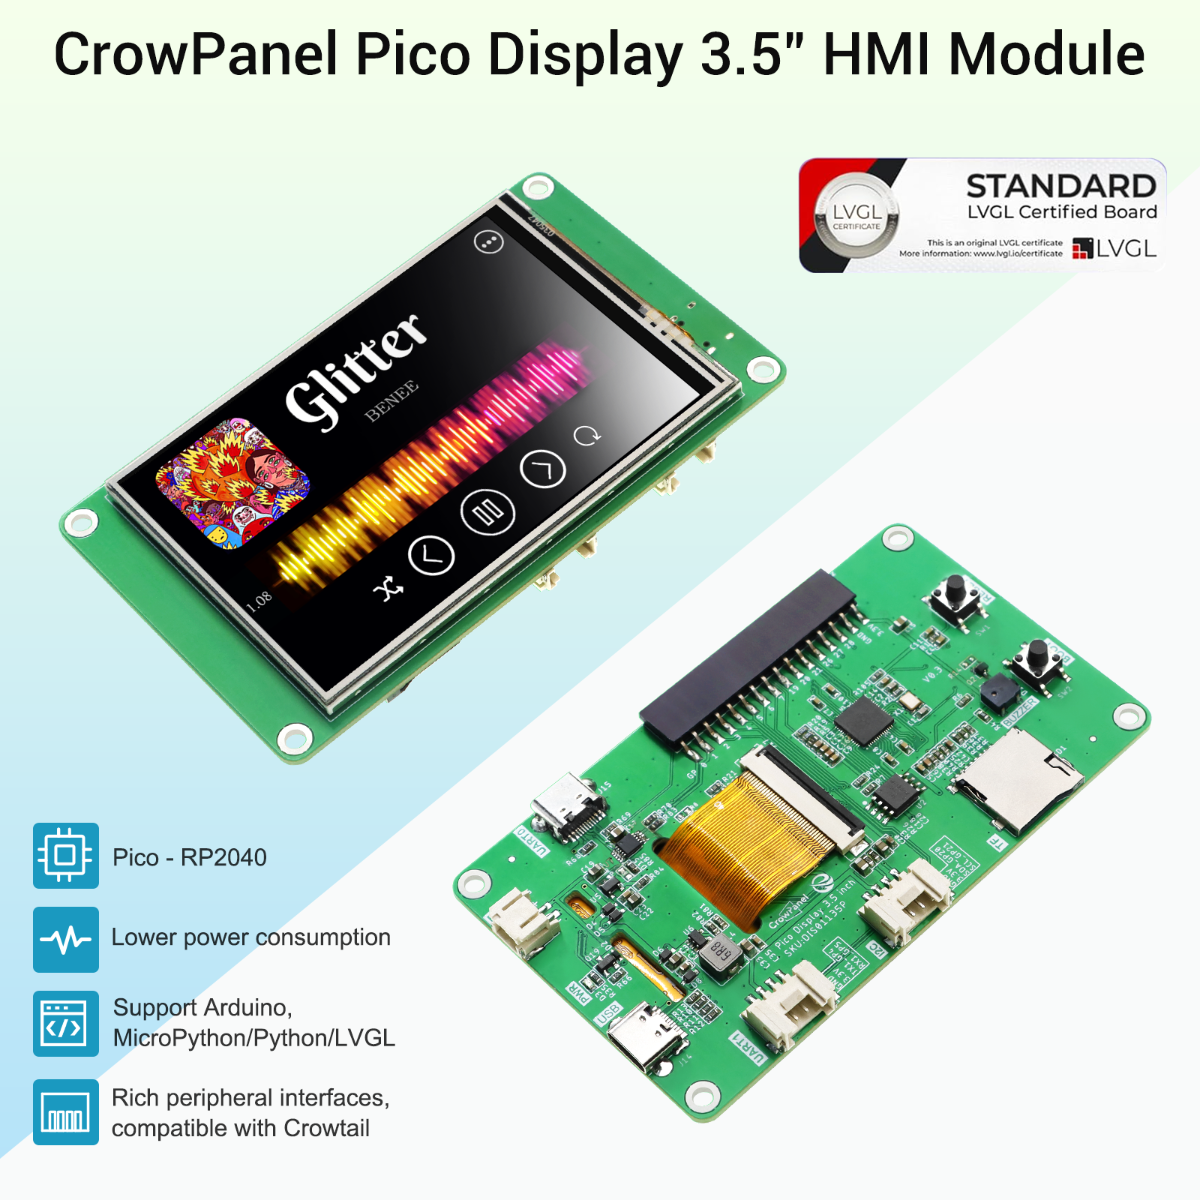 3.5 inch Raspberry Pi Pico display features